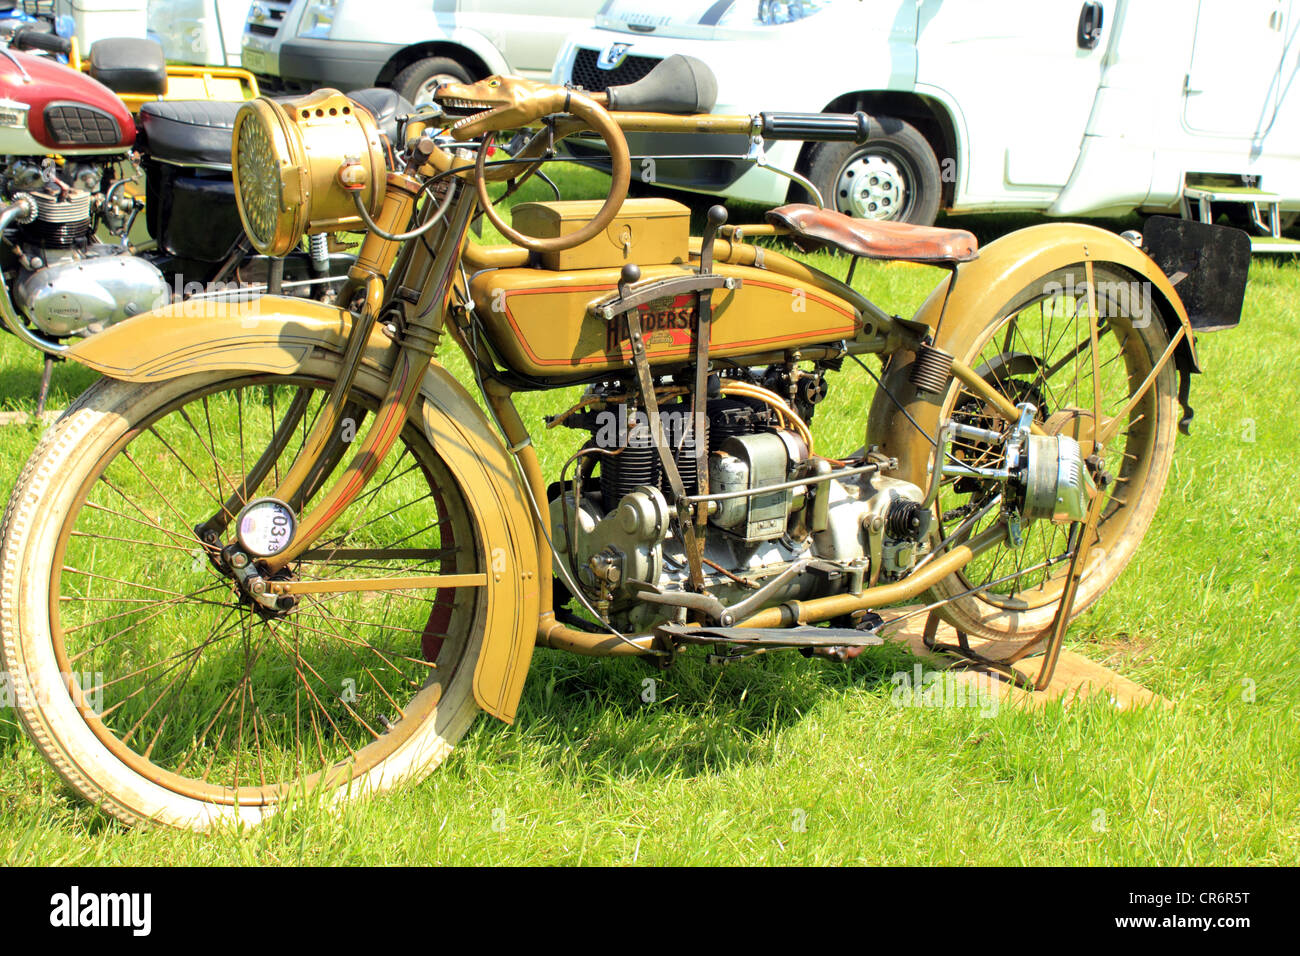 Henderson Excelsior Motorcycle Vintage Classic Stock Photo Alamy